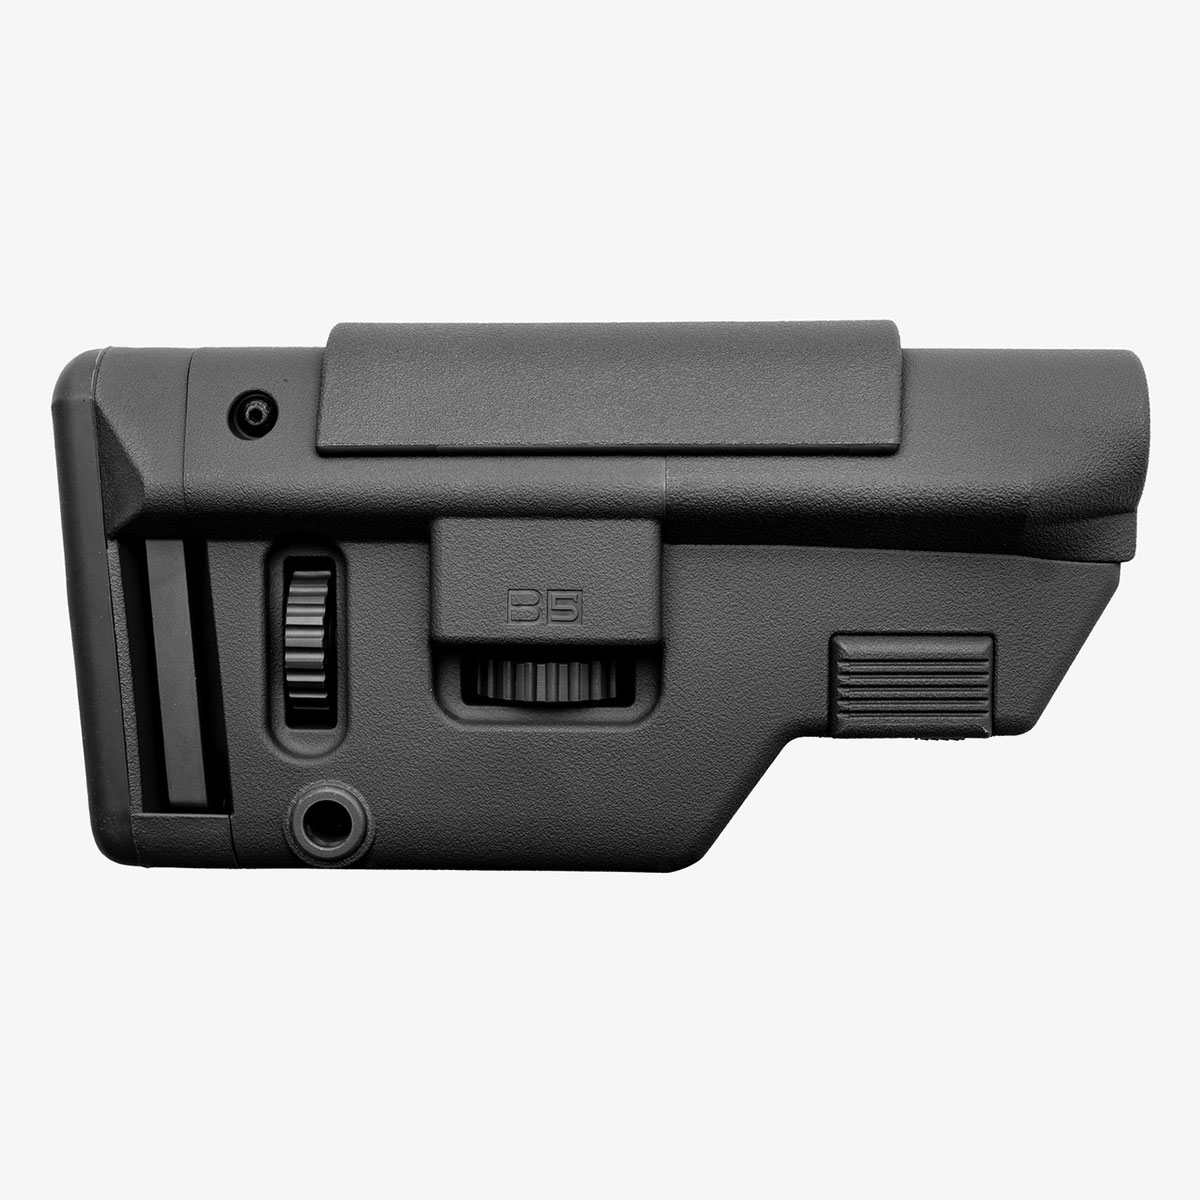 B5 SYSTEMS - AR-15 PRECISION STOCKS COLLAPSIBLE- LONG